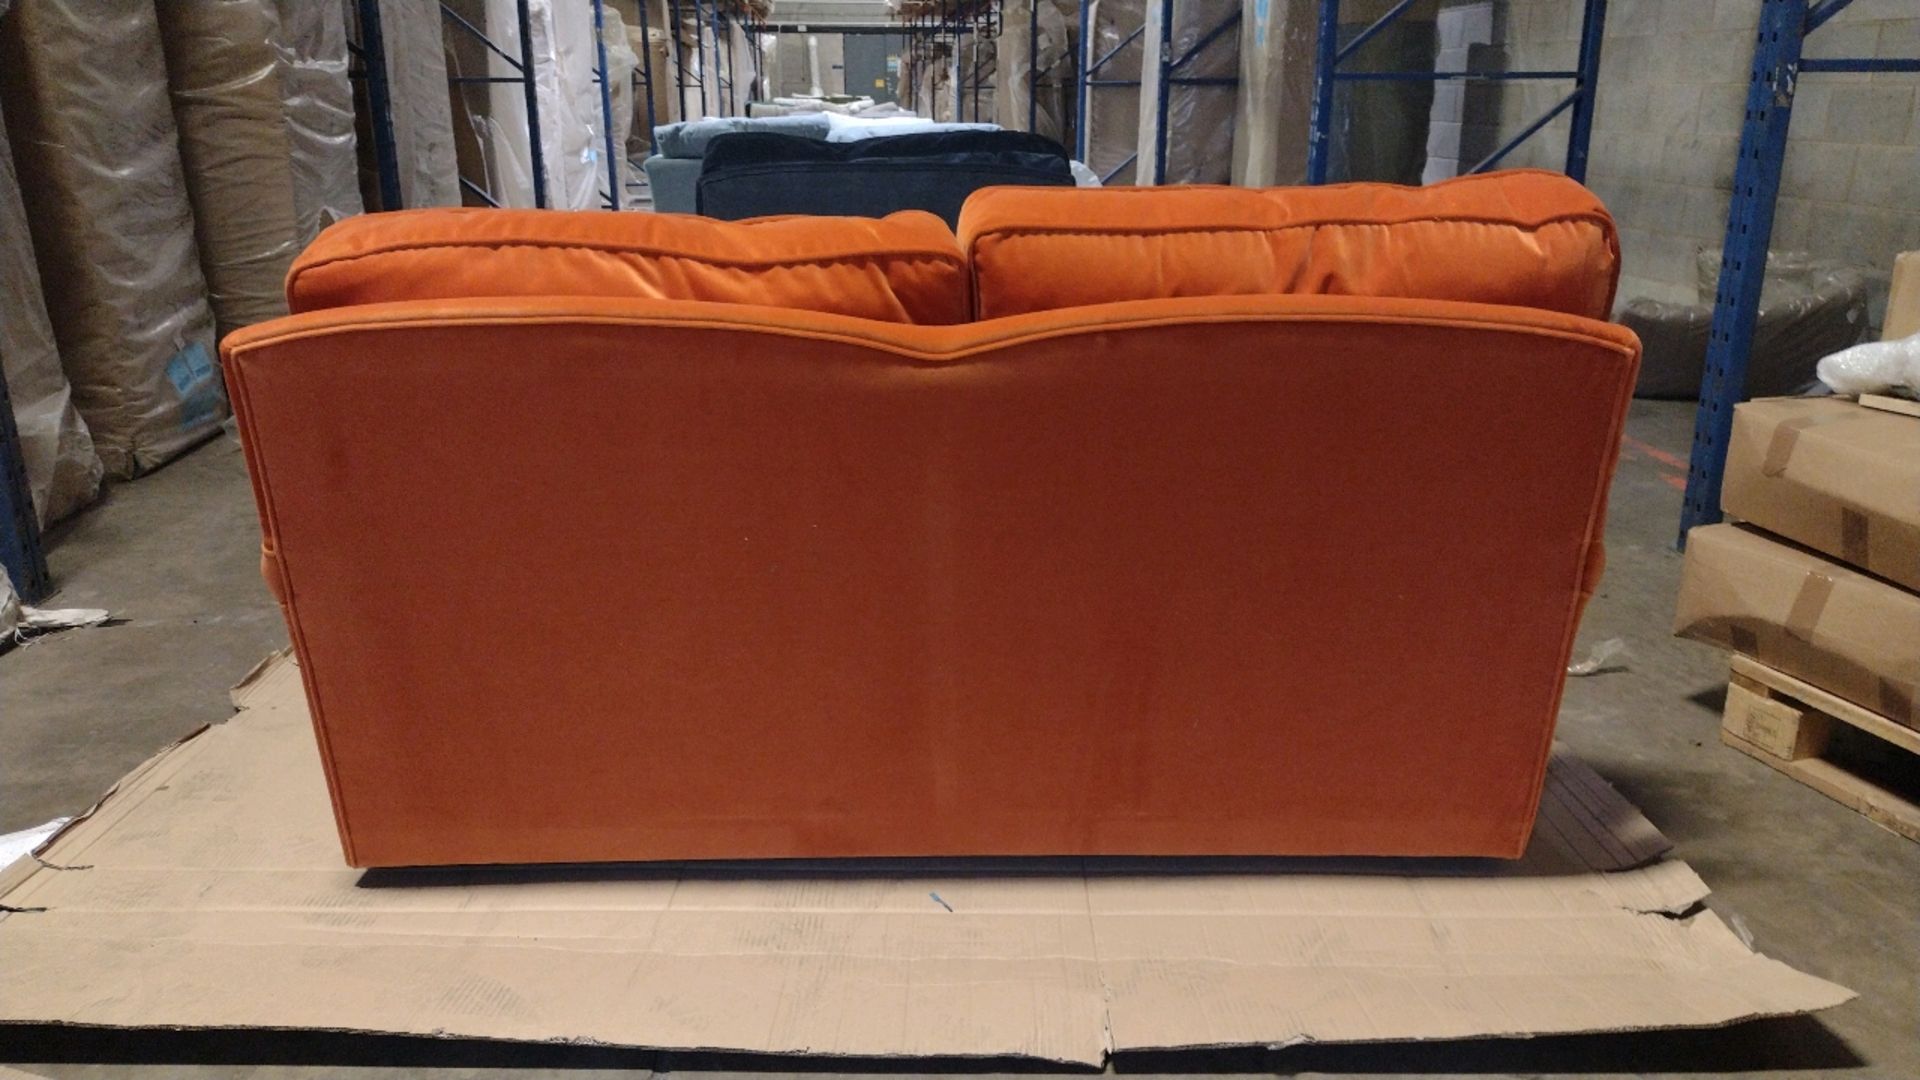 Bluebell 2 Seat Sofa - Image 3 of 7